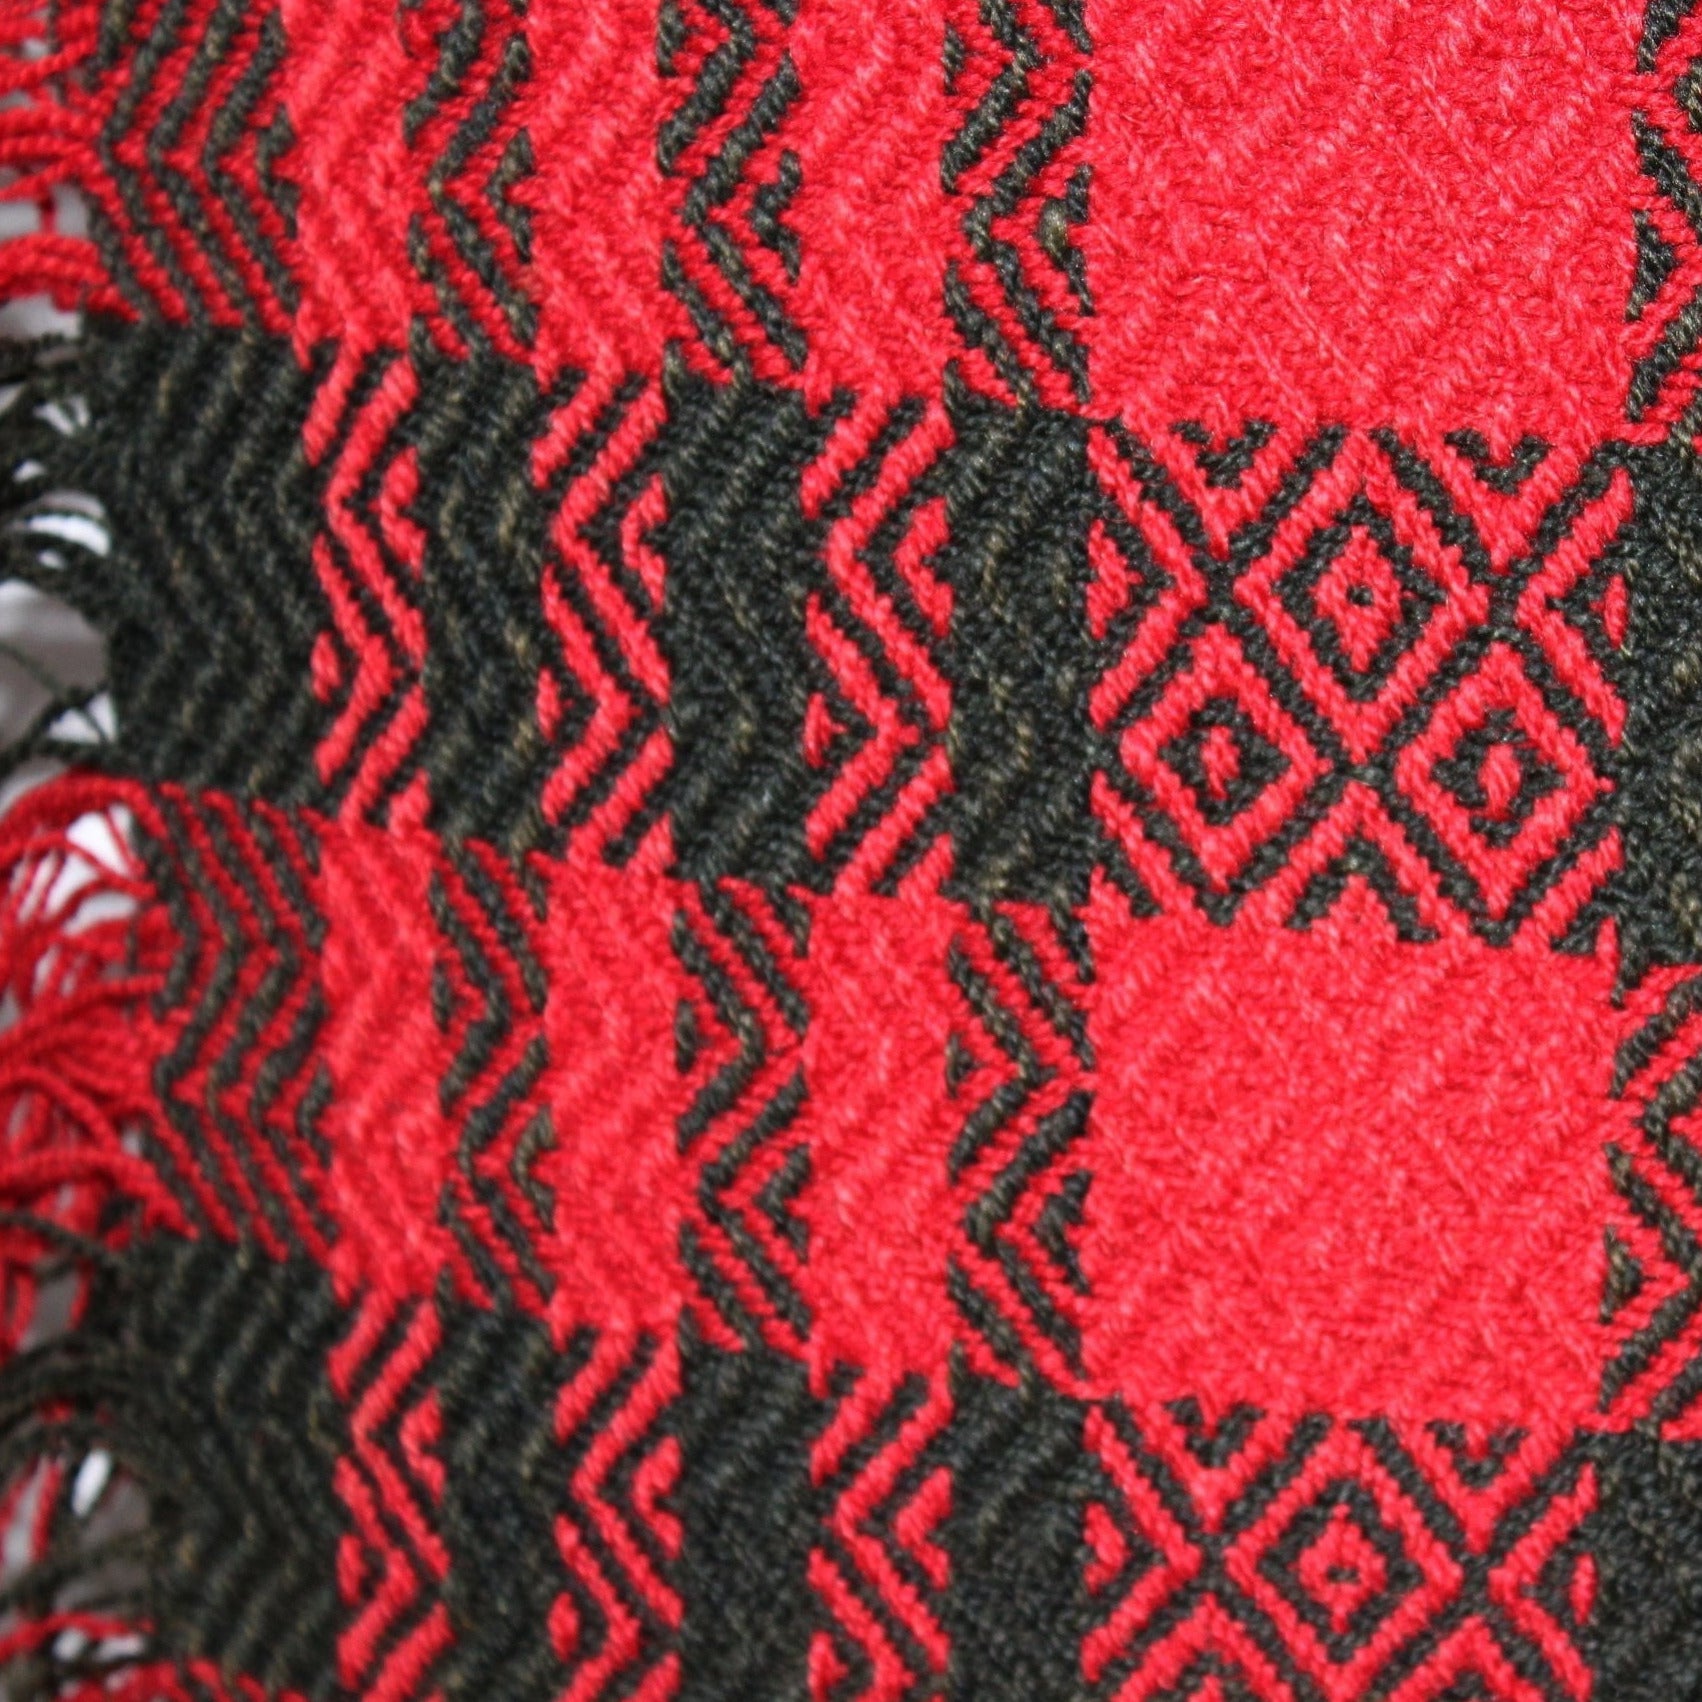 Antique Wool Woven Coverlet Blanket 1800s Red Black Intricate Checkerboard Geometric 66" X 92" unusual